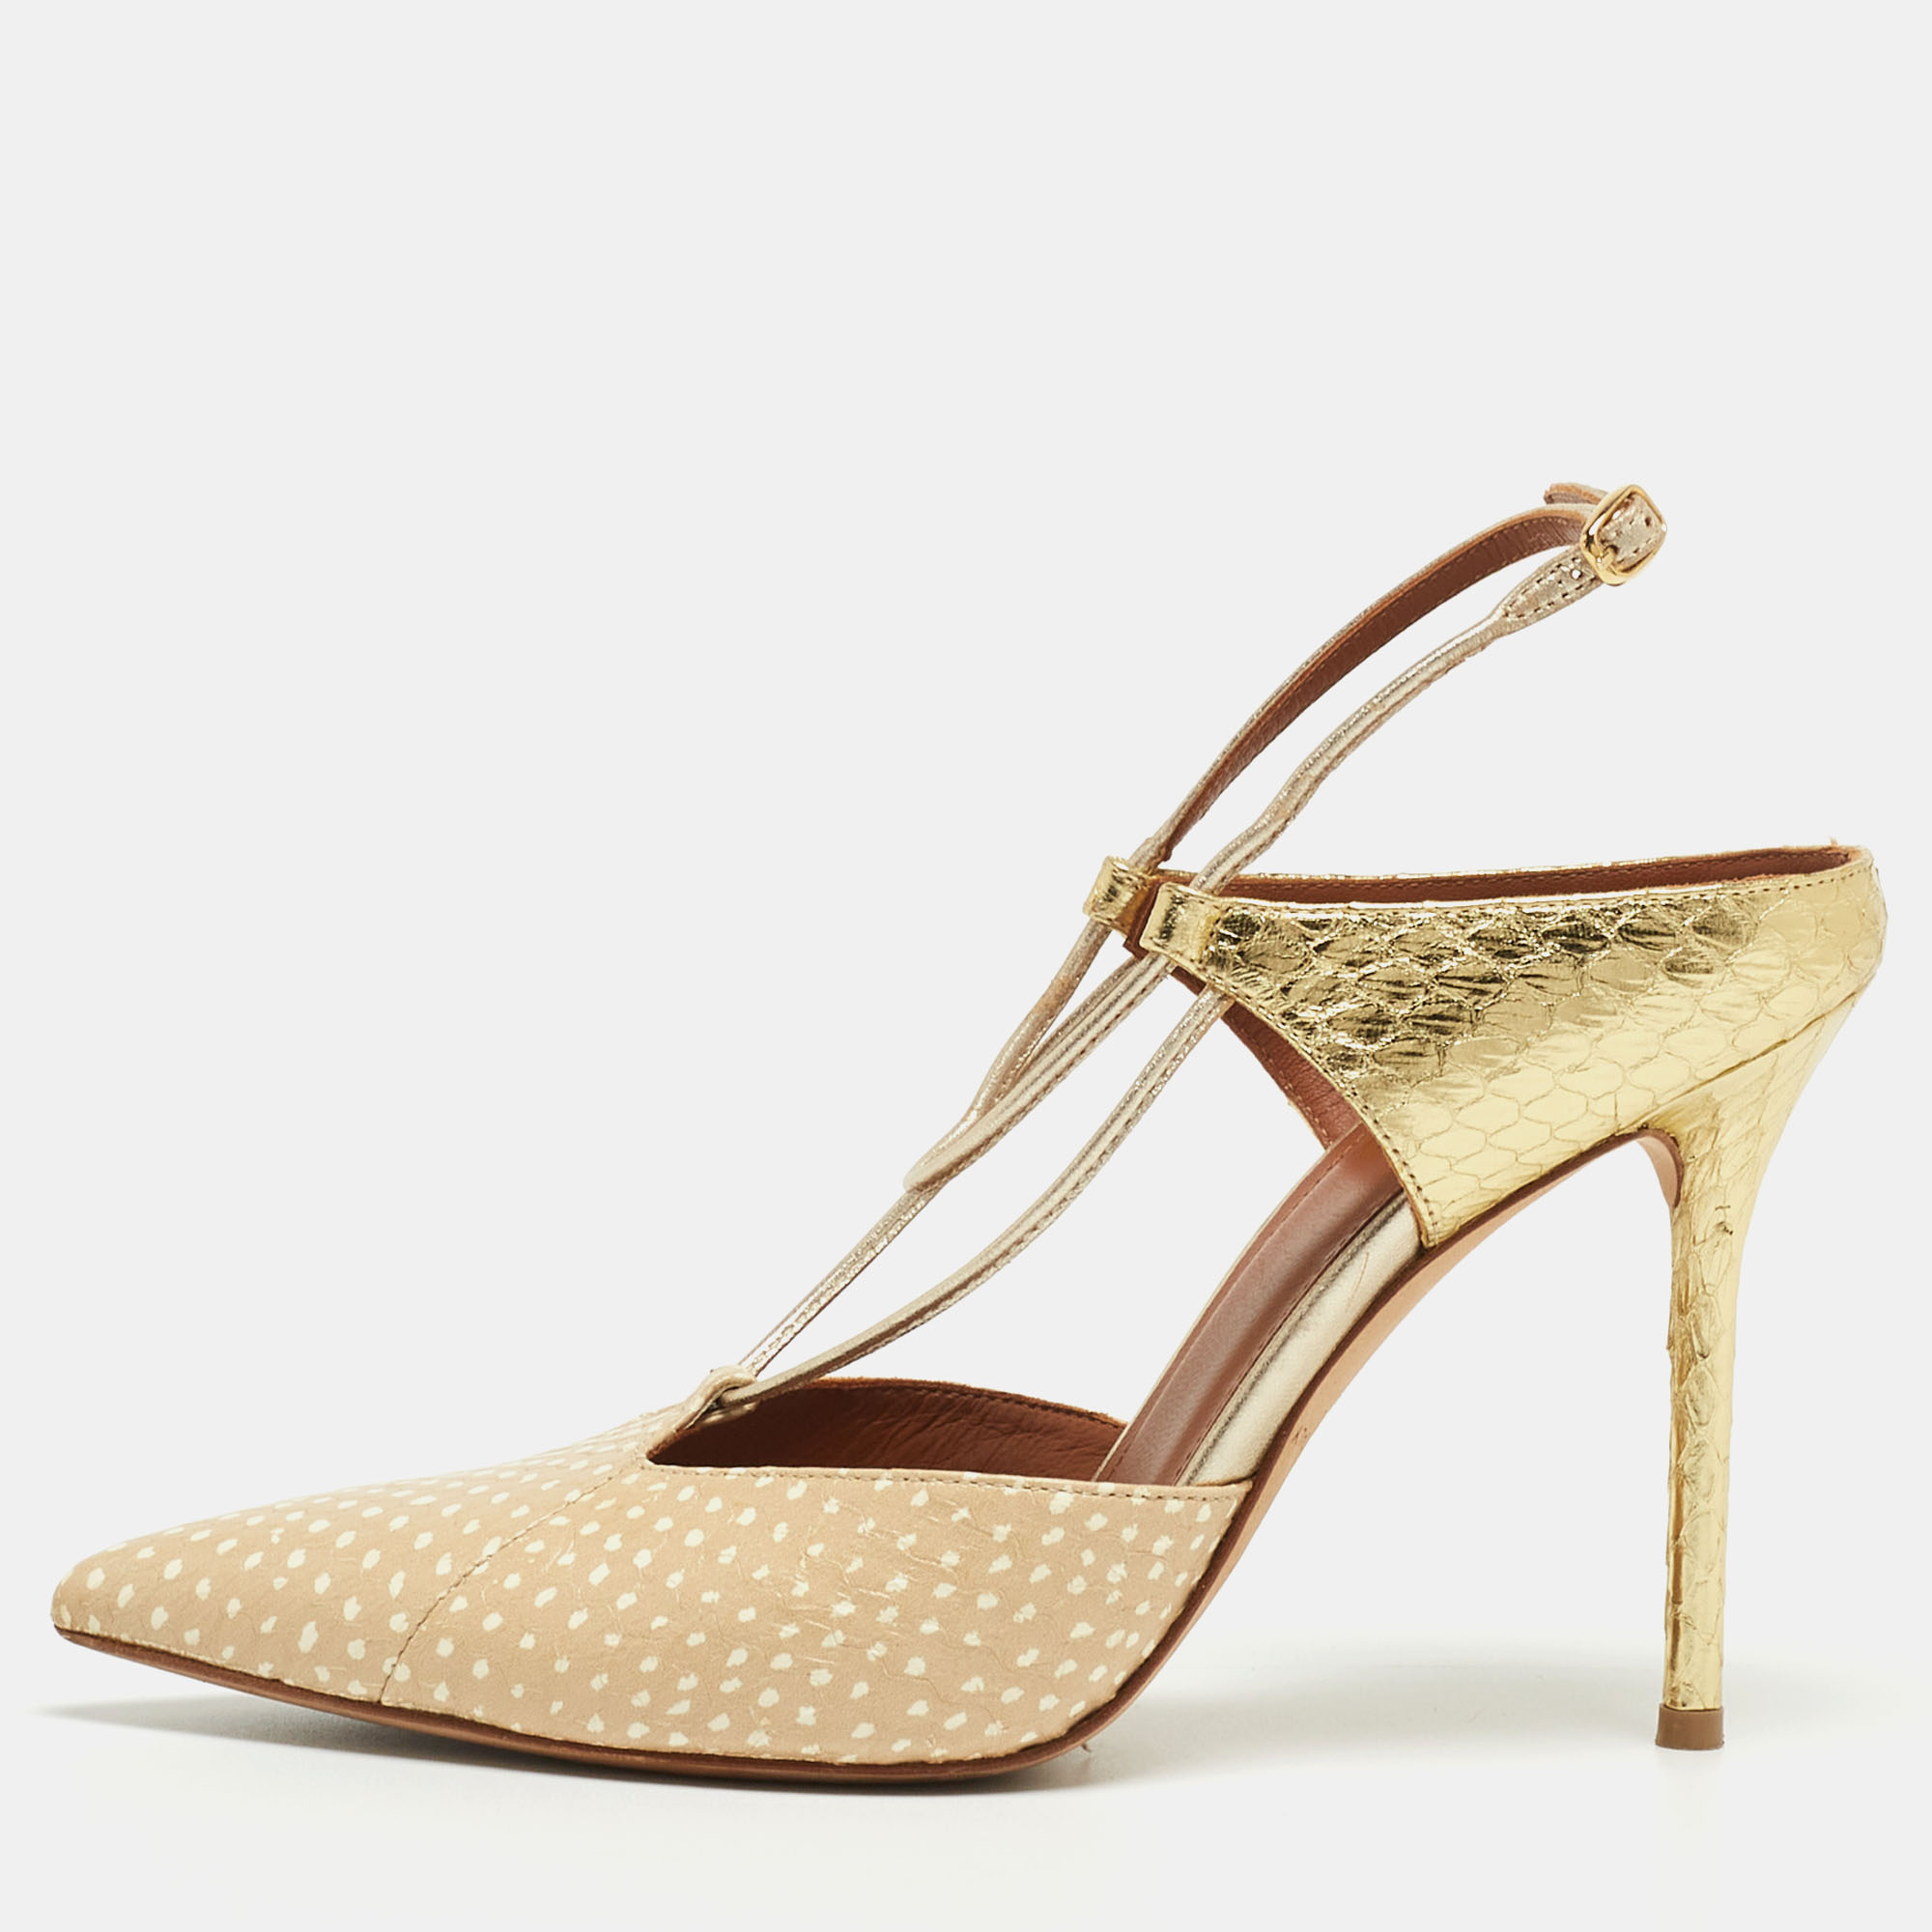 Malone Souliers Beige/Gold Printed Leather And Embossed Python Daria Pumps Size 37